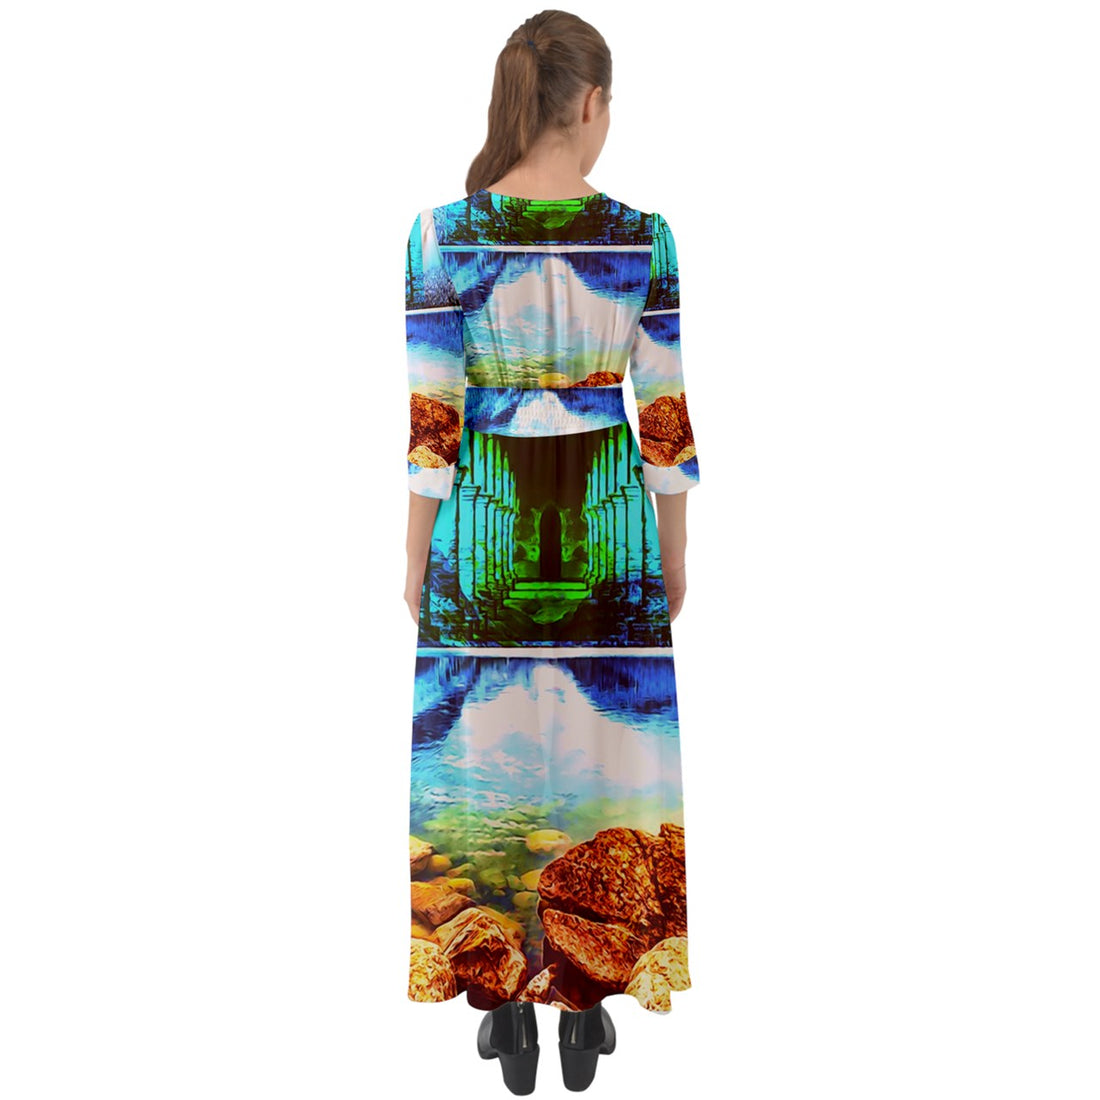 Protect your home and frequency Button Up Boho Maxi Dress